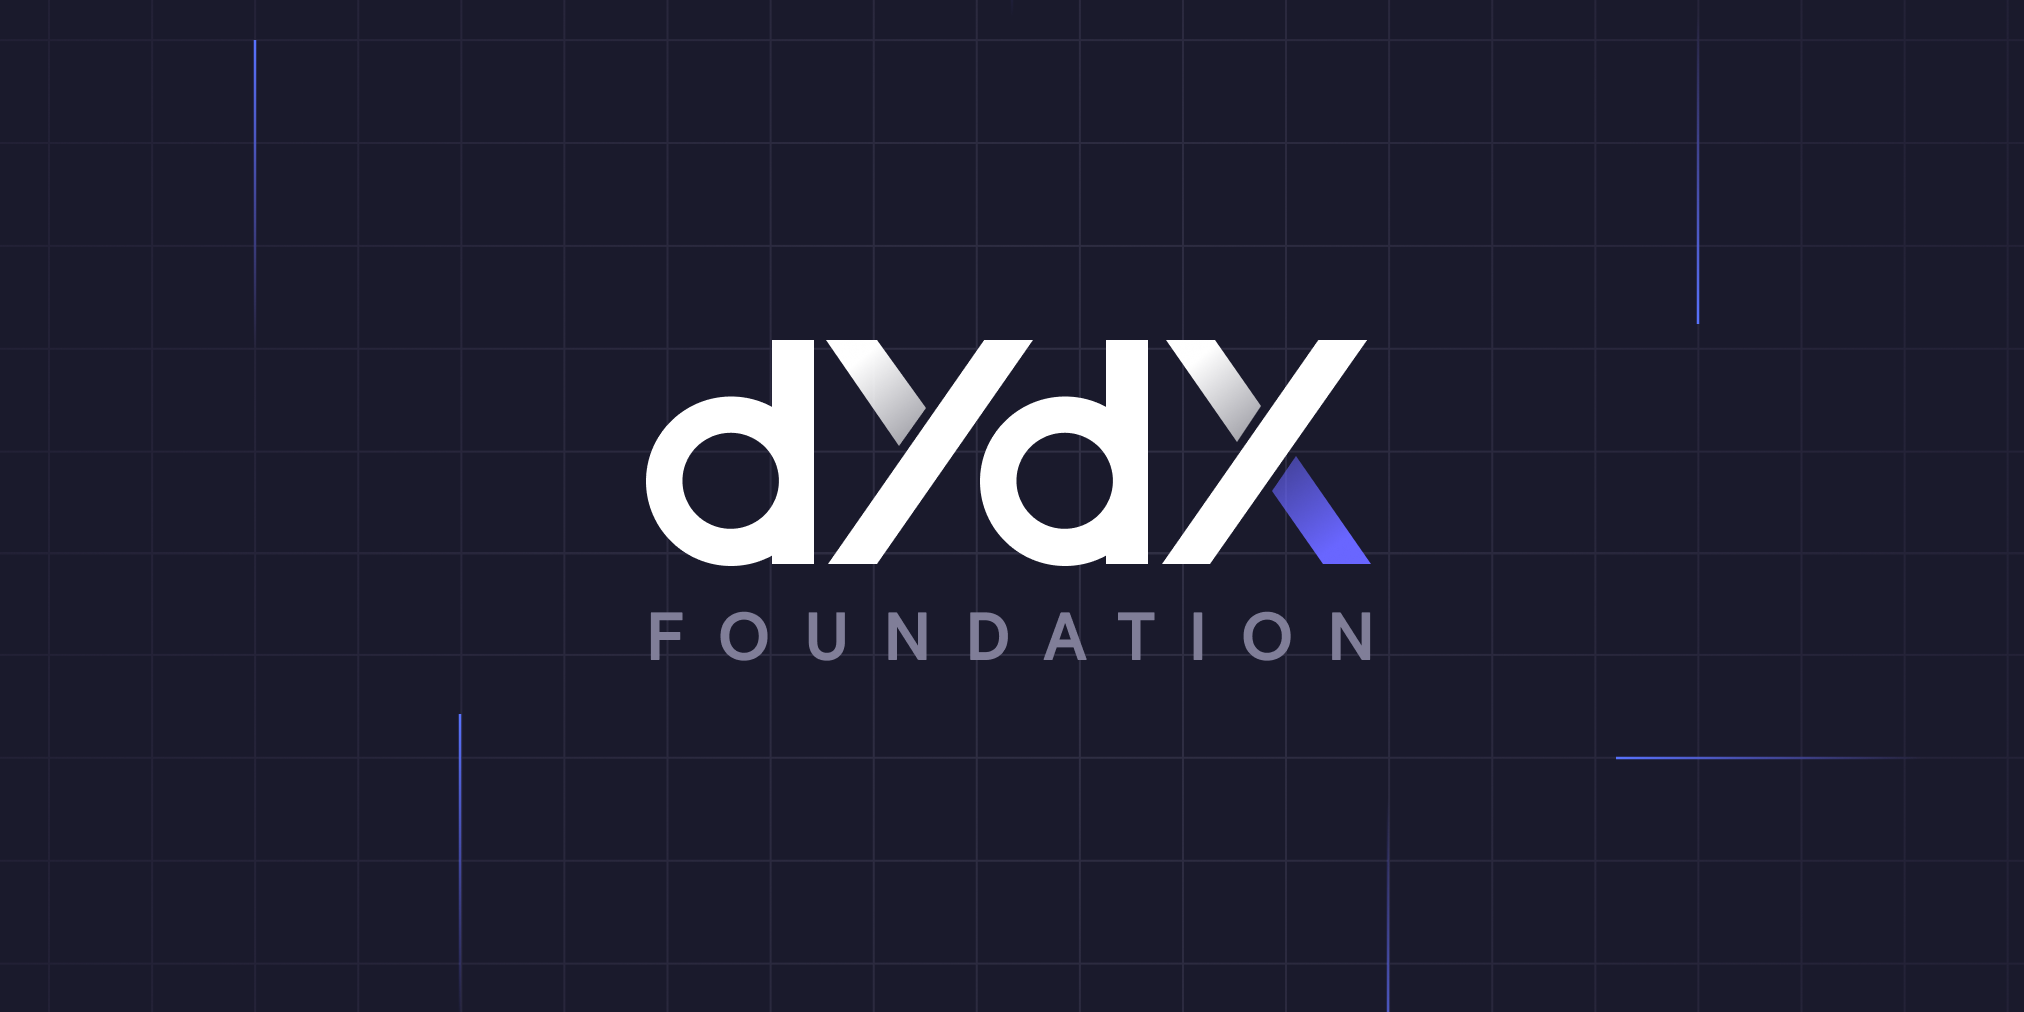 Introducing the dYdX Foundation